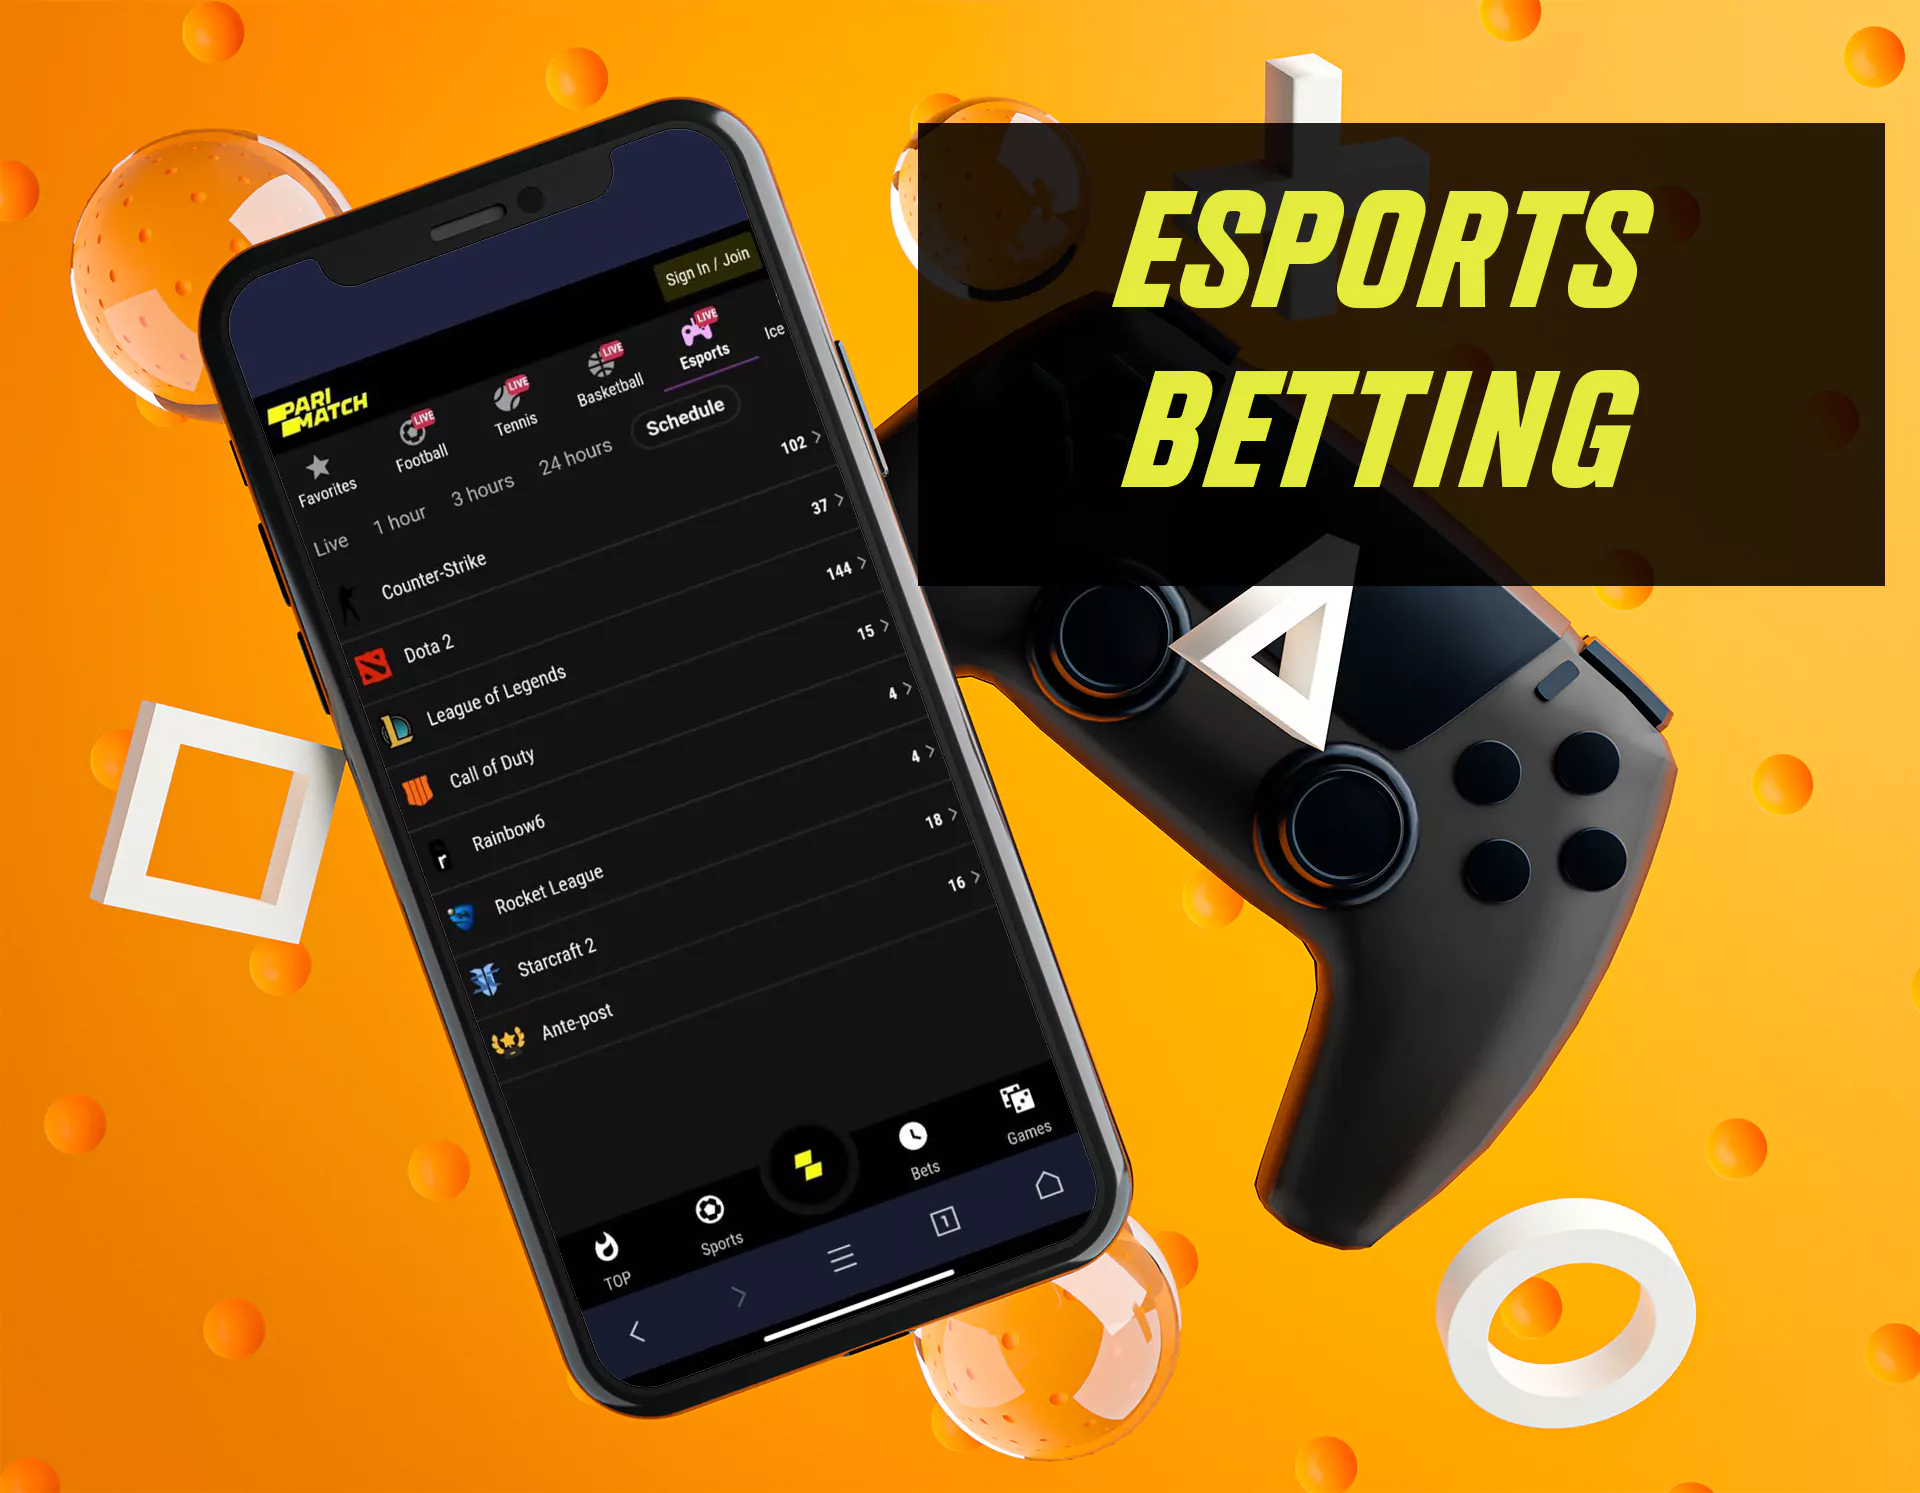 You can watch the streams and place bets on esports in the Parimatch mobile app.